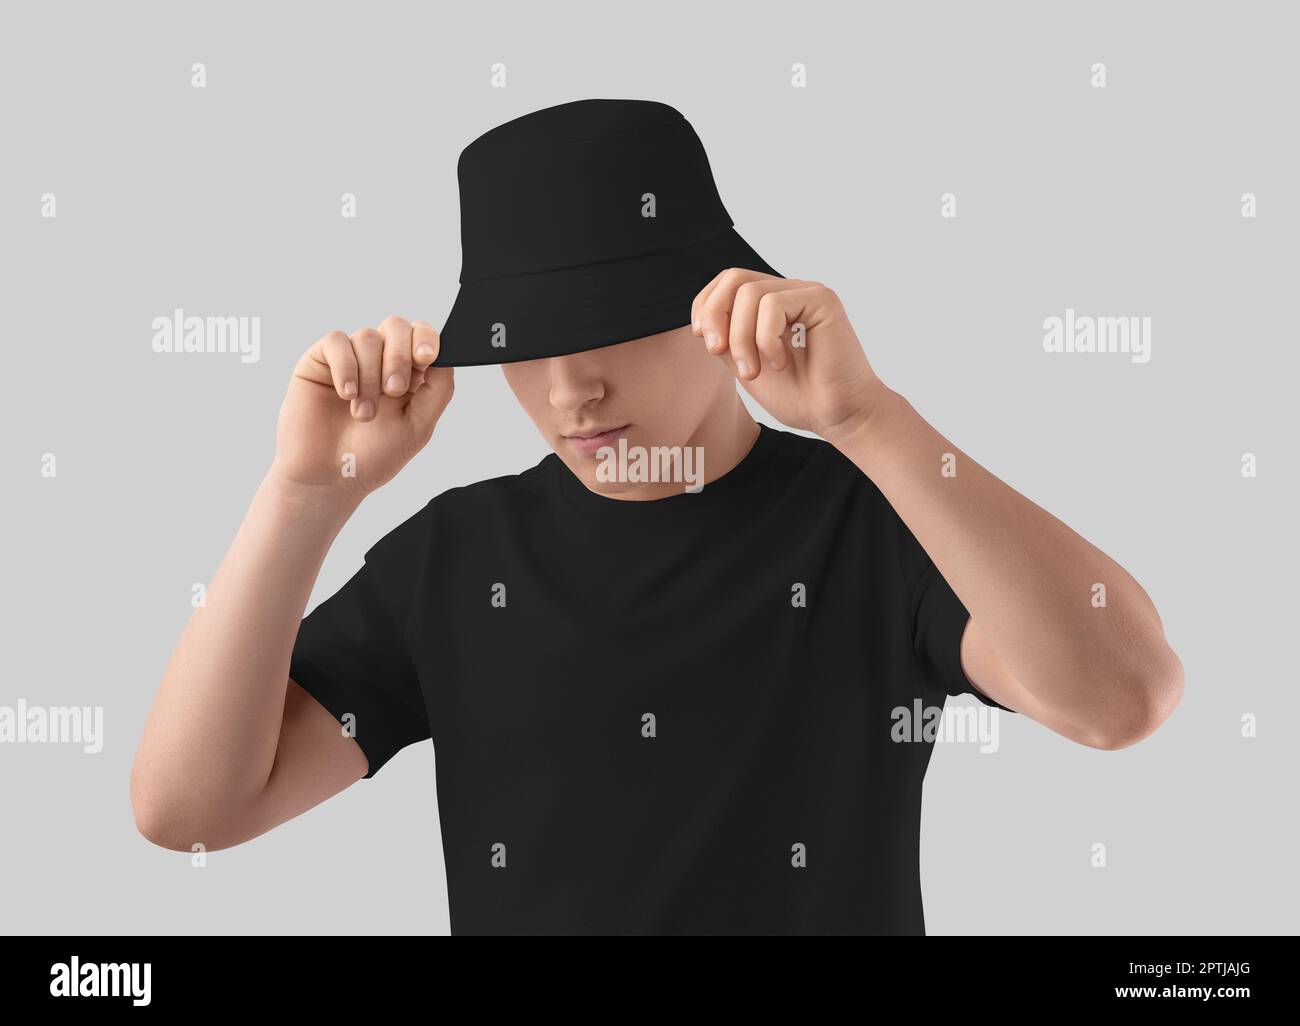 Mockup of a black hat on a young guy in a t-shirt, holds a universal accessory for design, brand. Stylish summer headwear template, product photograph Stock Photo